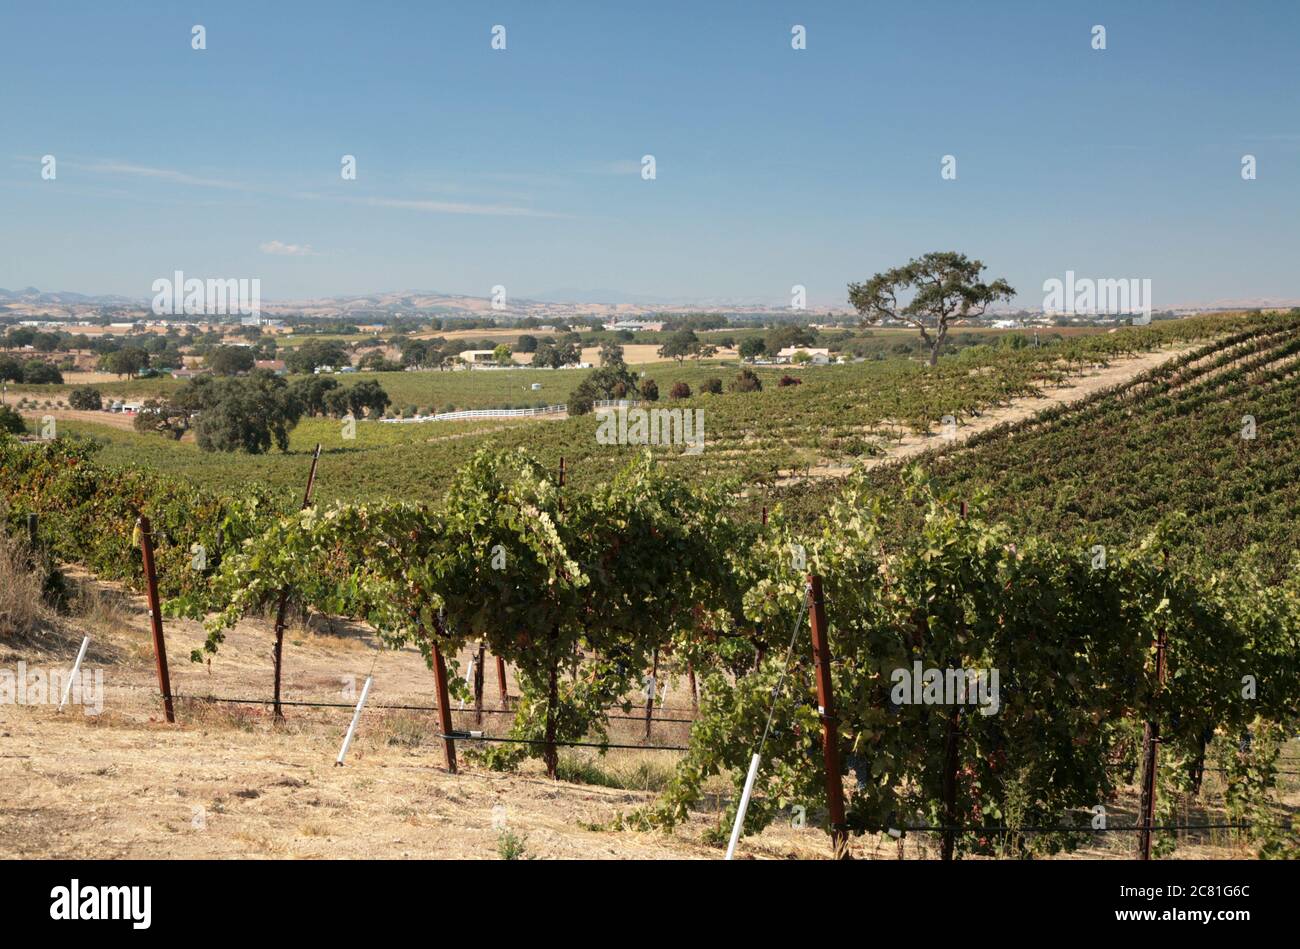 Coastal oaks standing among the rows of wine grapes in a Paso Robles vineyard Stock Photo